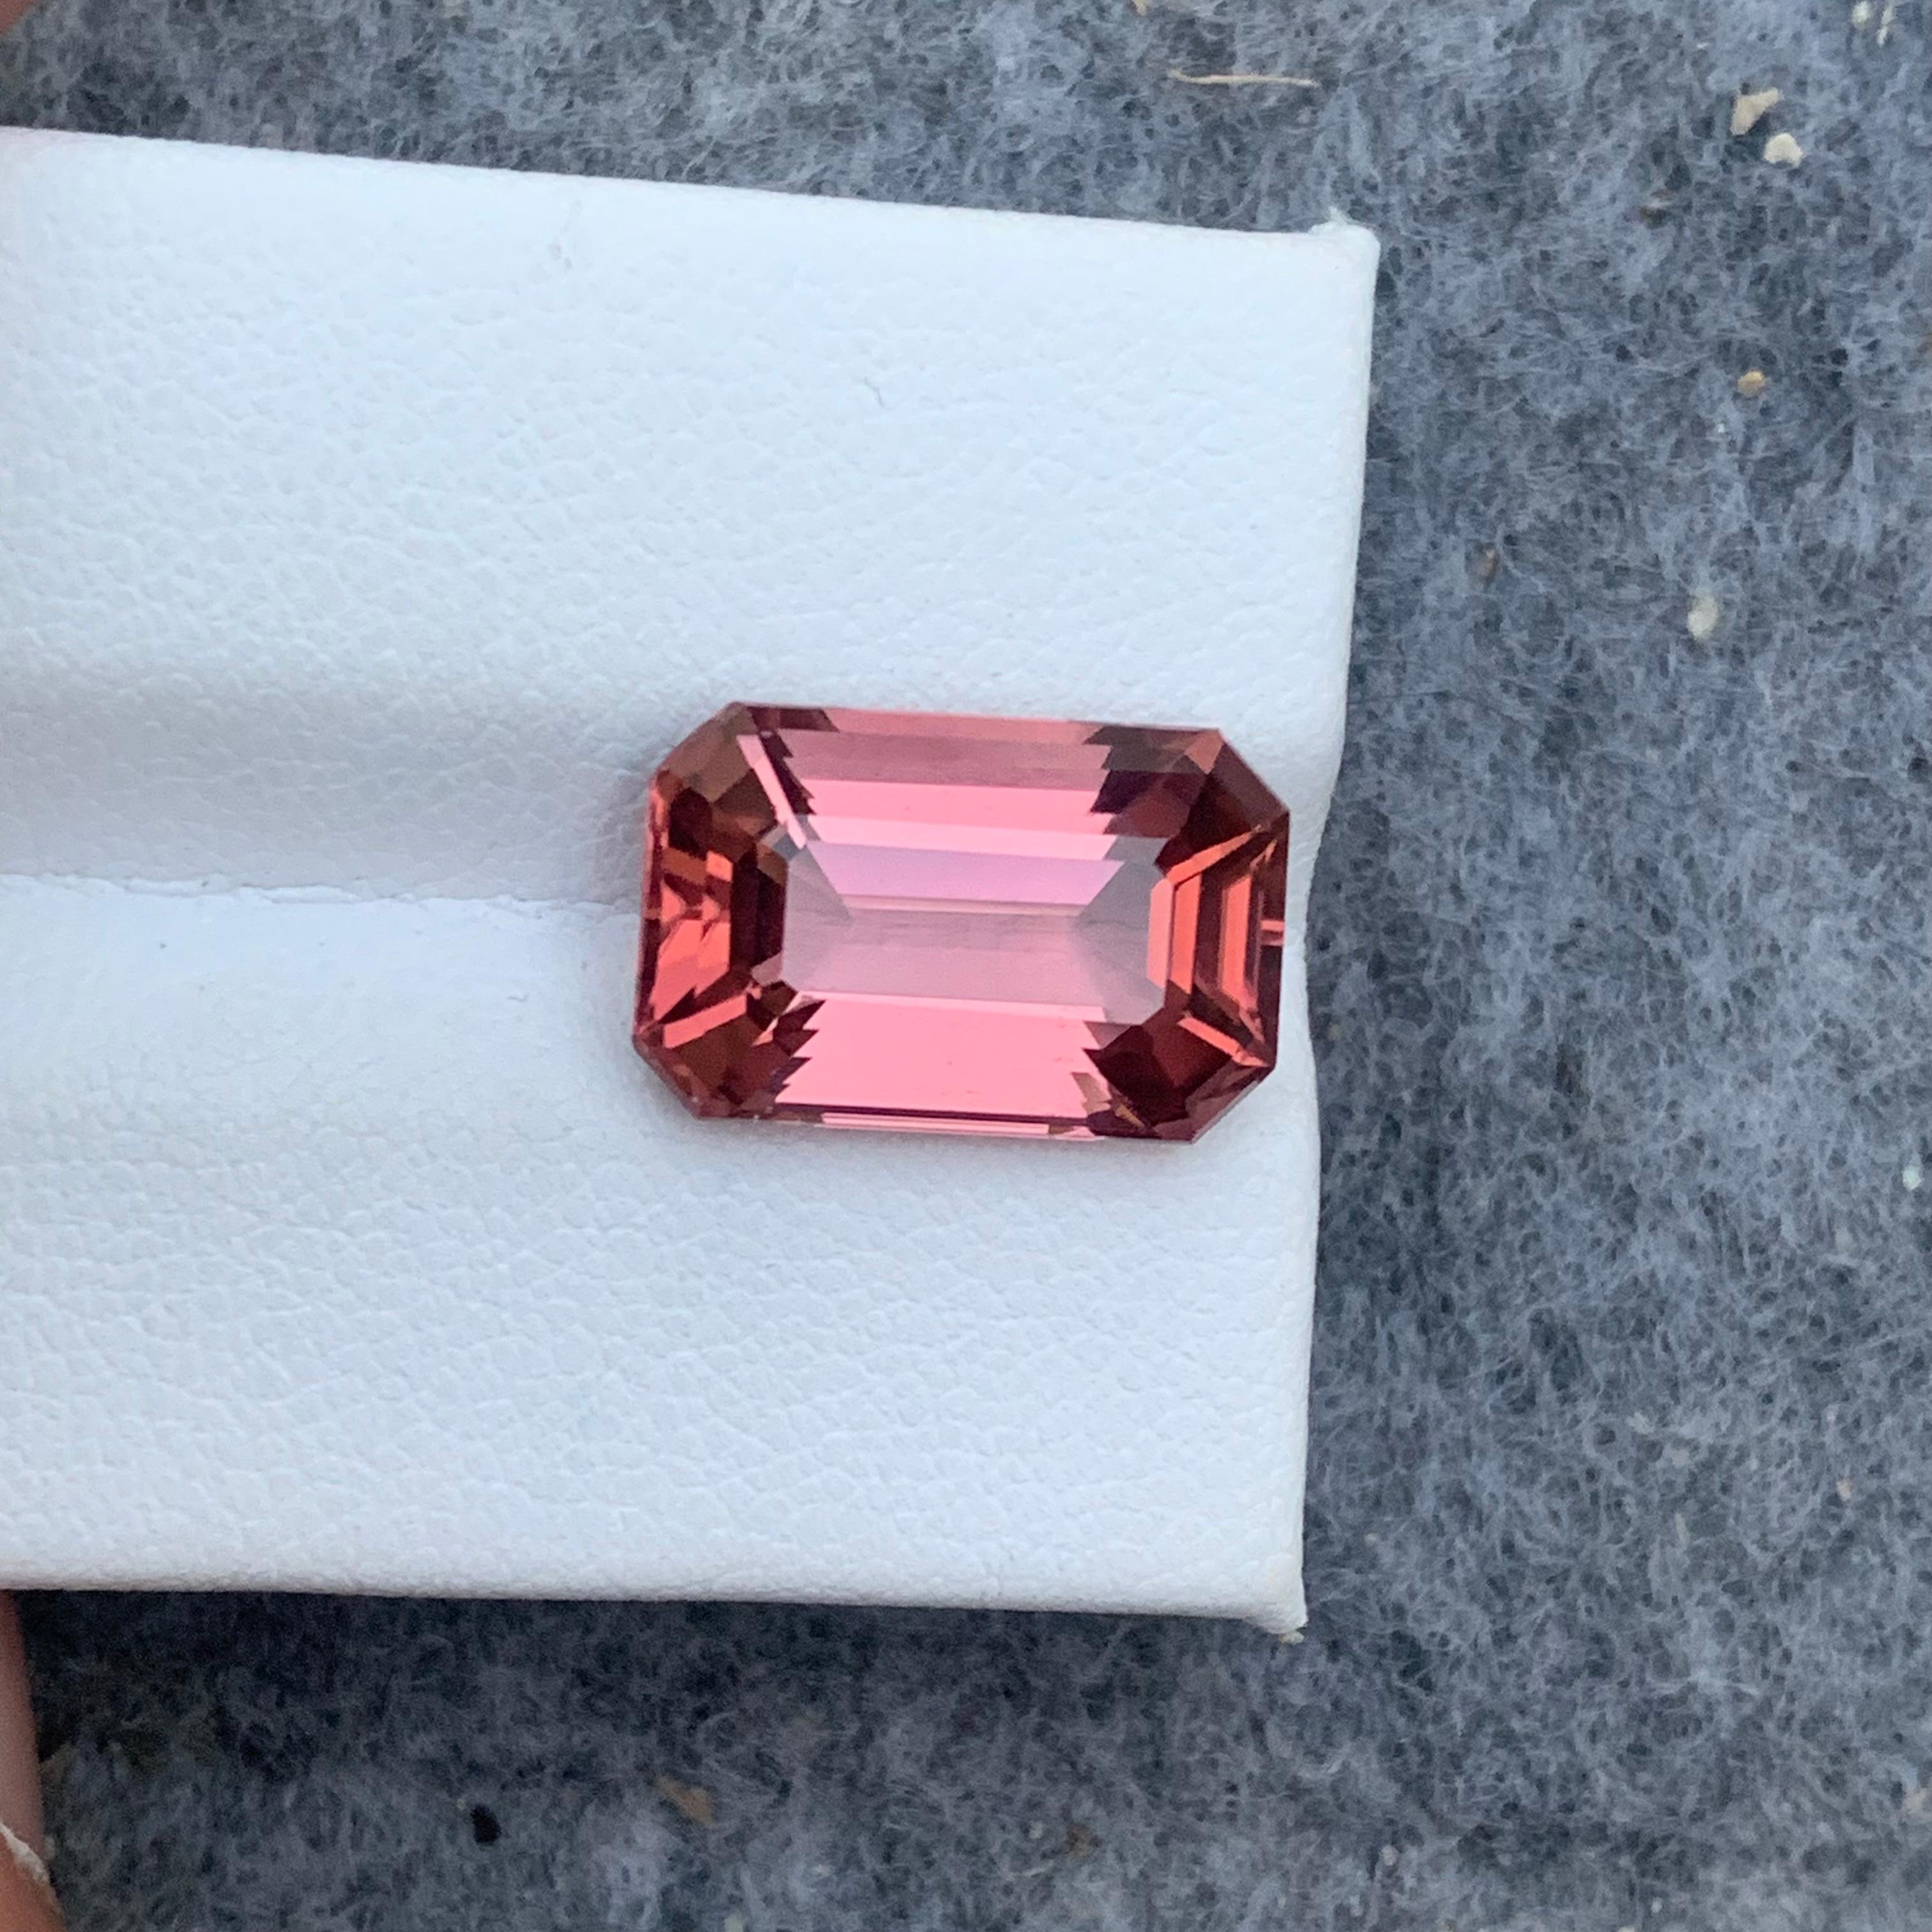 9.0 Carat AAA Quality Loose Soft Pink Tourmaline Emerald Cut From Afghanistan 12